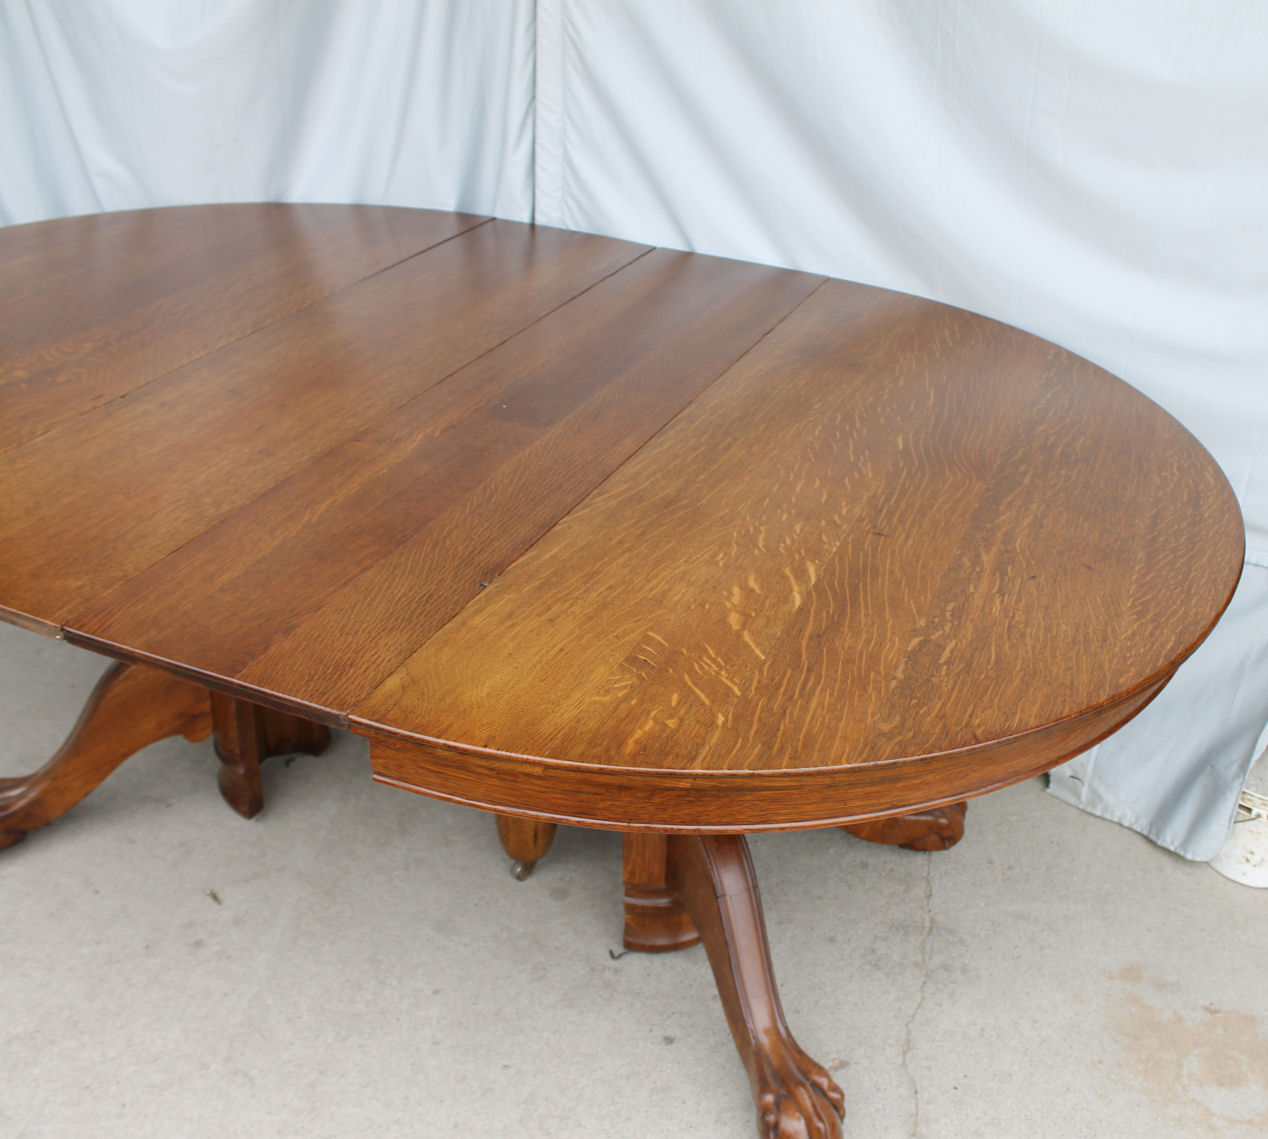 Bargain John's Antiques | Round Oak Dining Table - claw feet 52